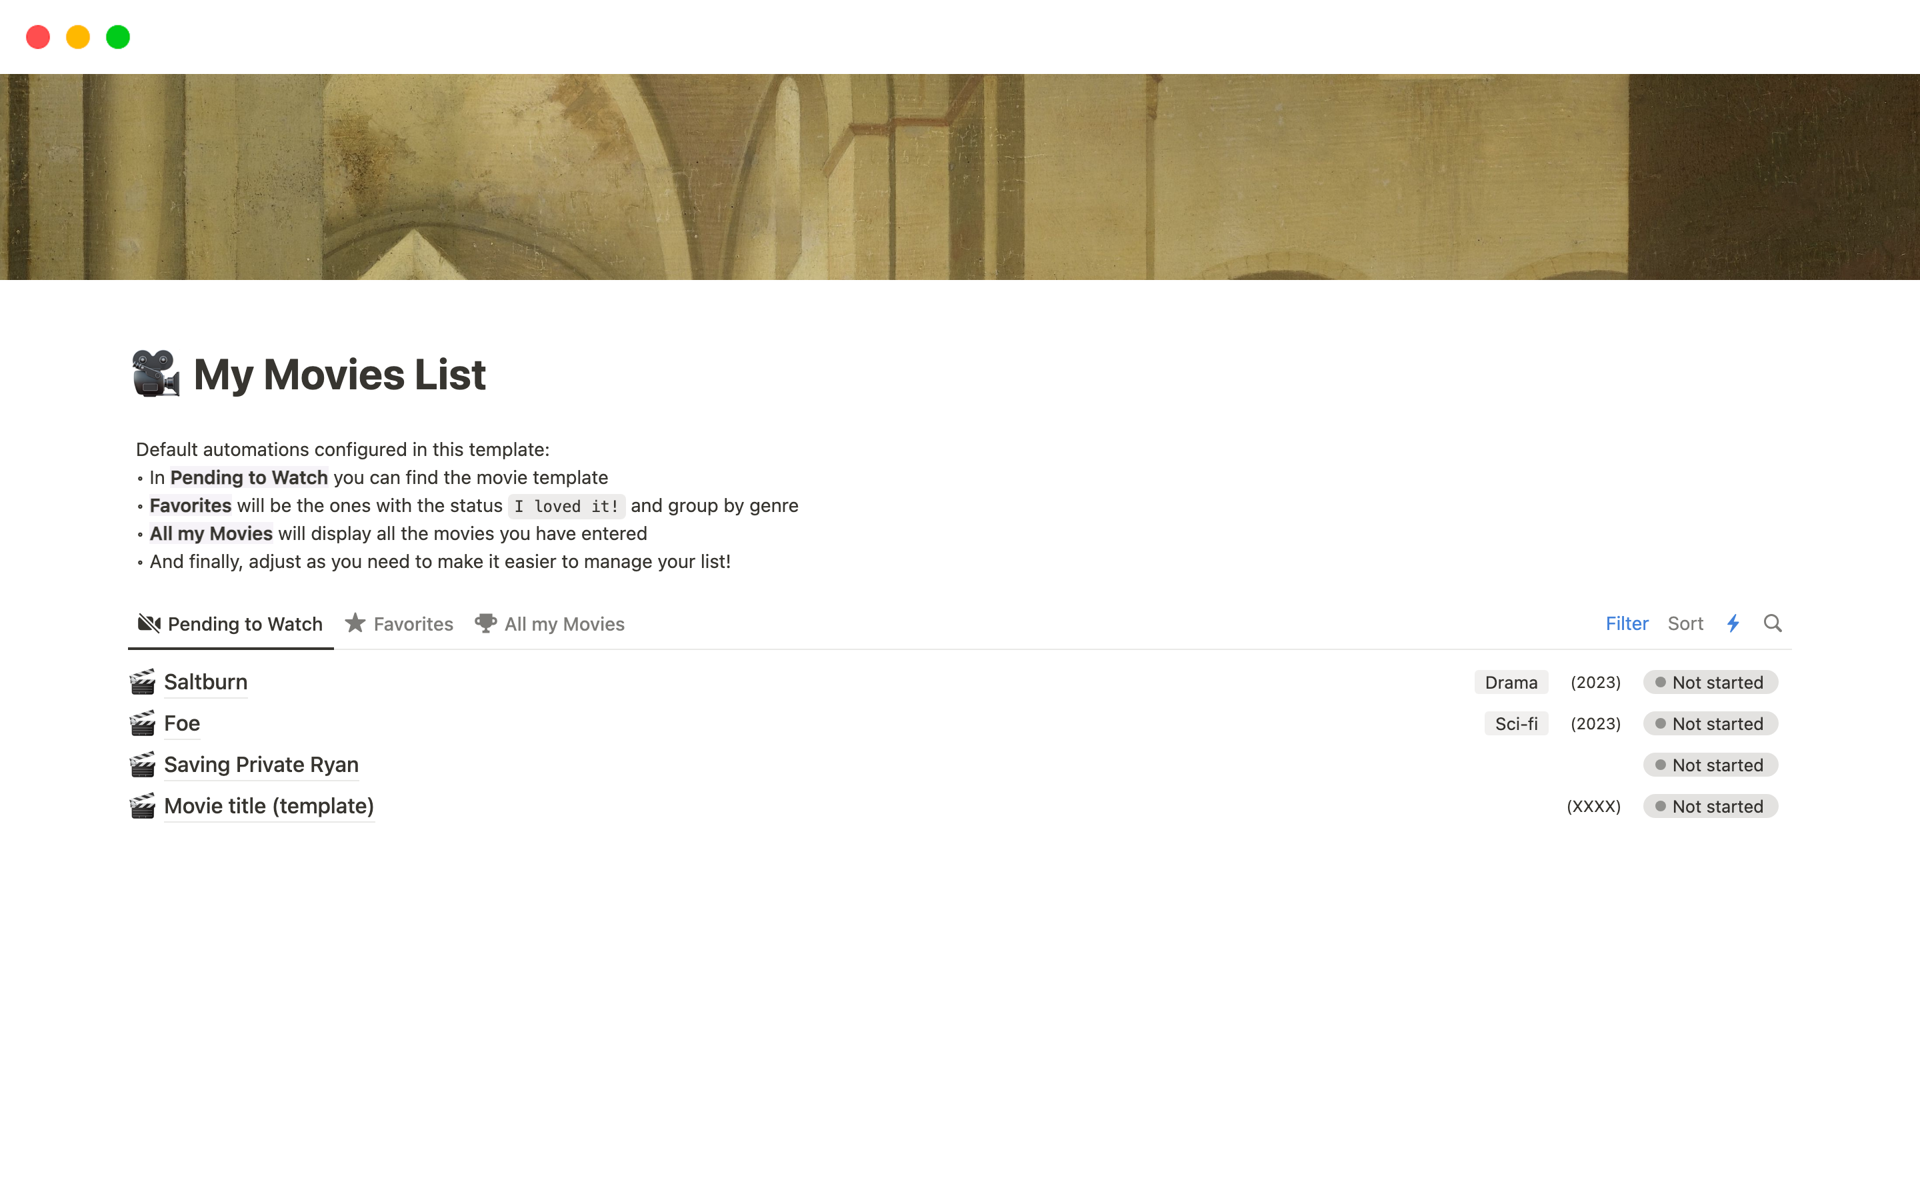 Provides a simple way to organize your movie list (watched and not watched!)